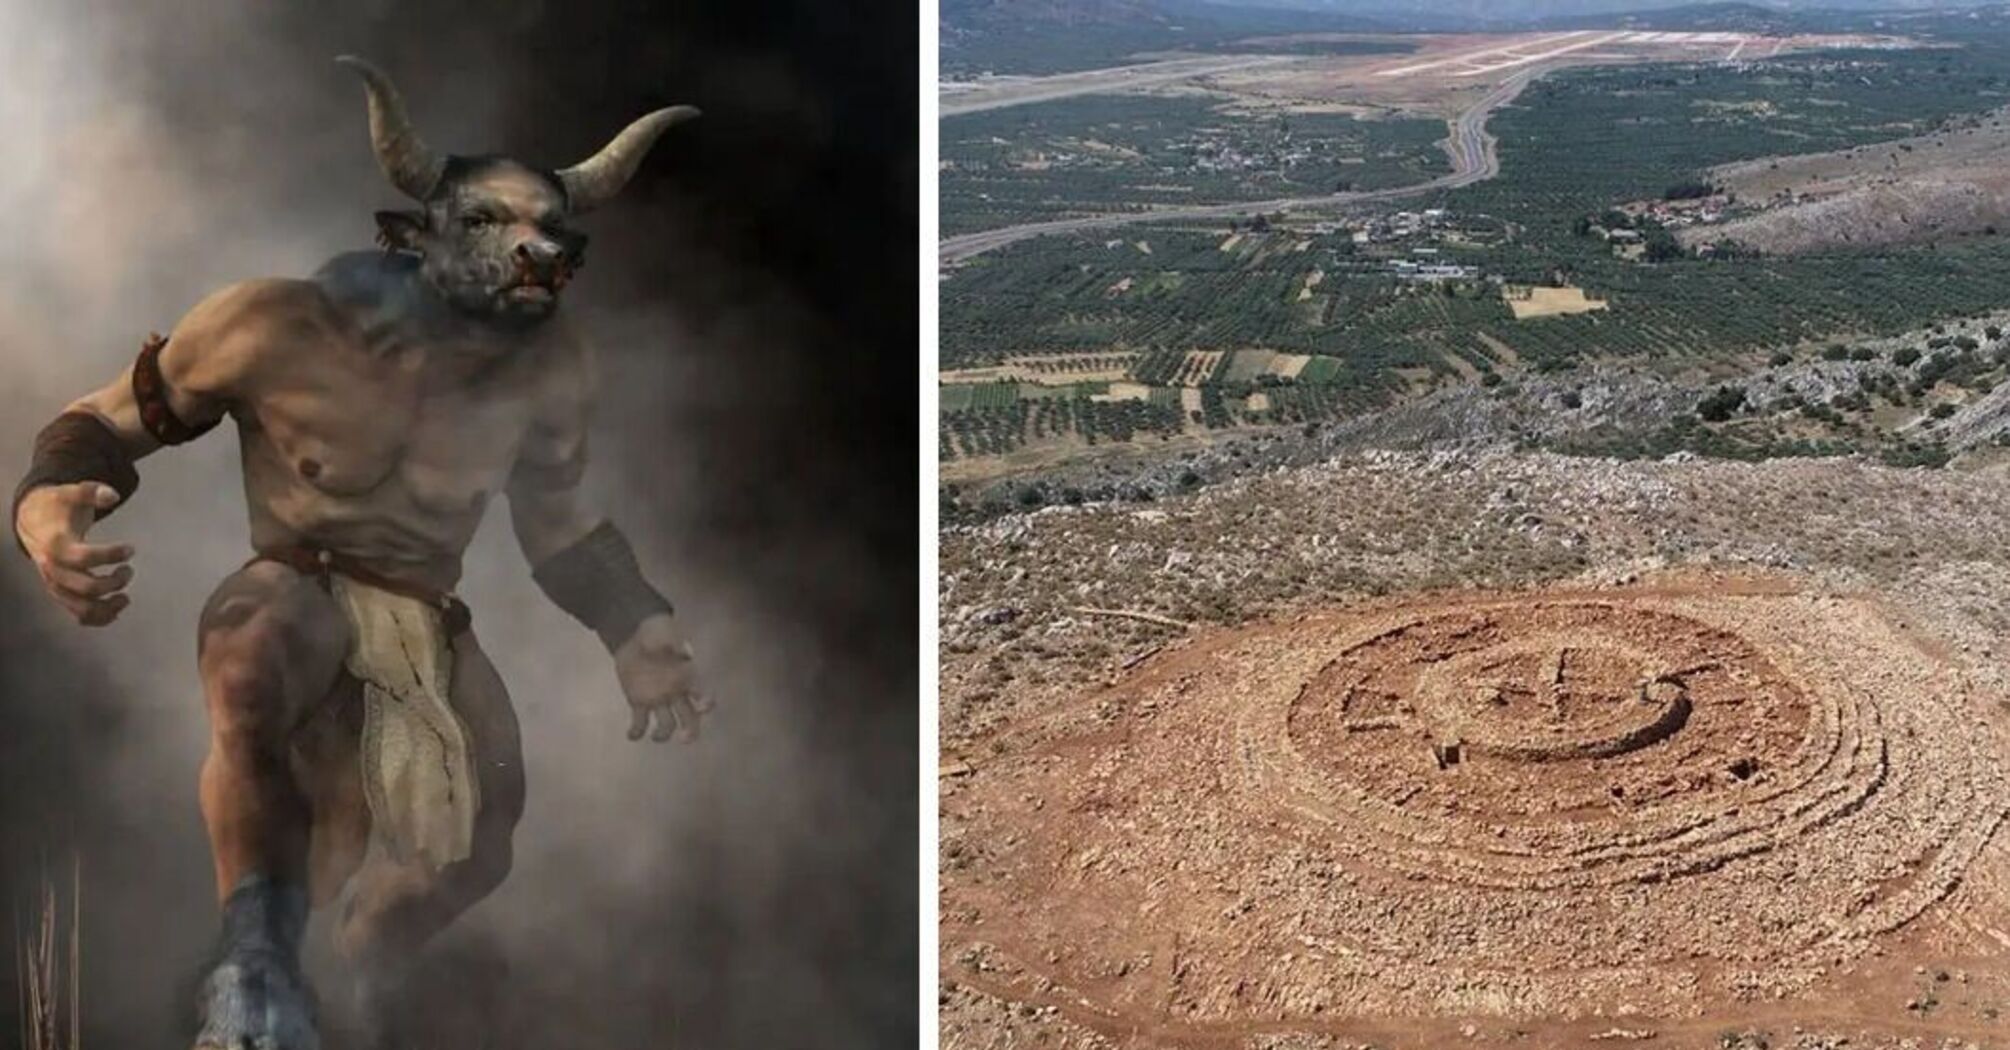 A 4000-year-old Minoan labyrinth where the Minotaur lived discovered in Crete (photo)